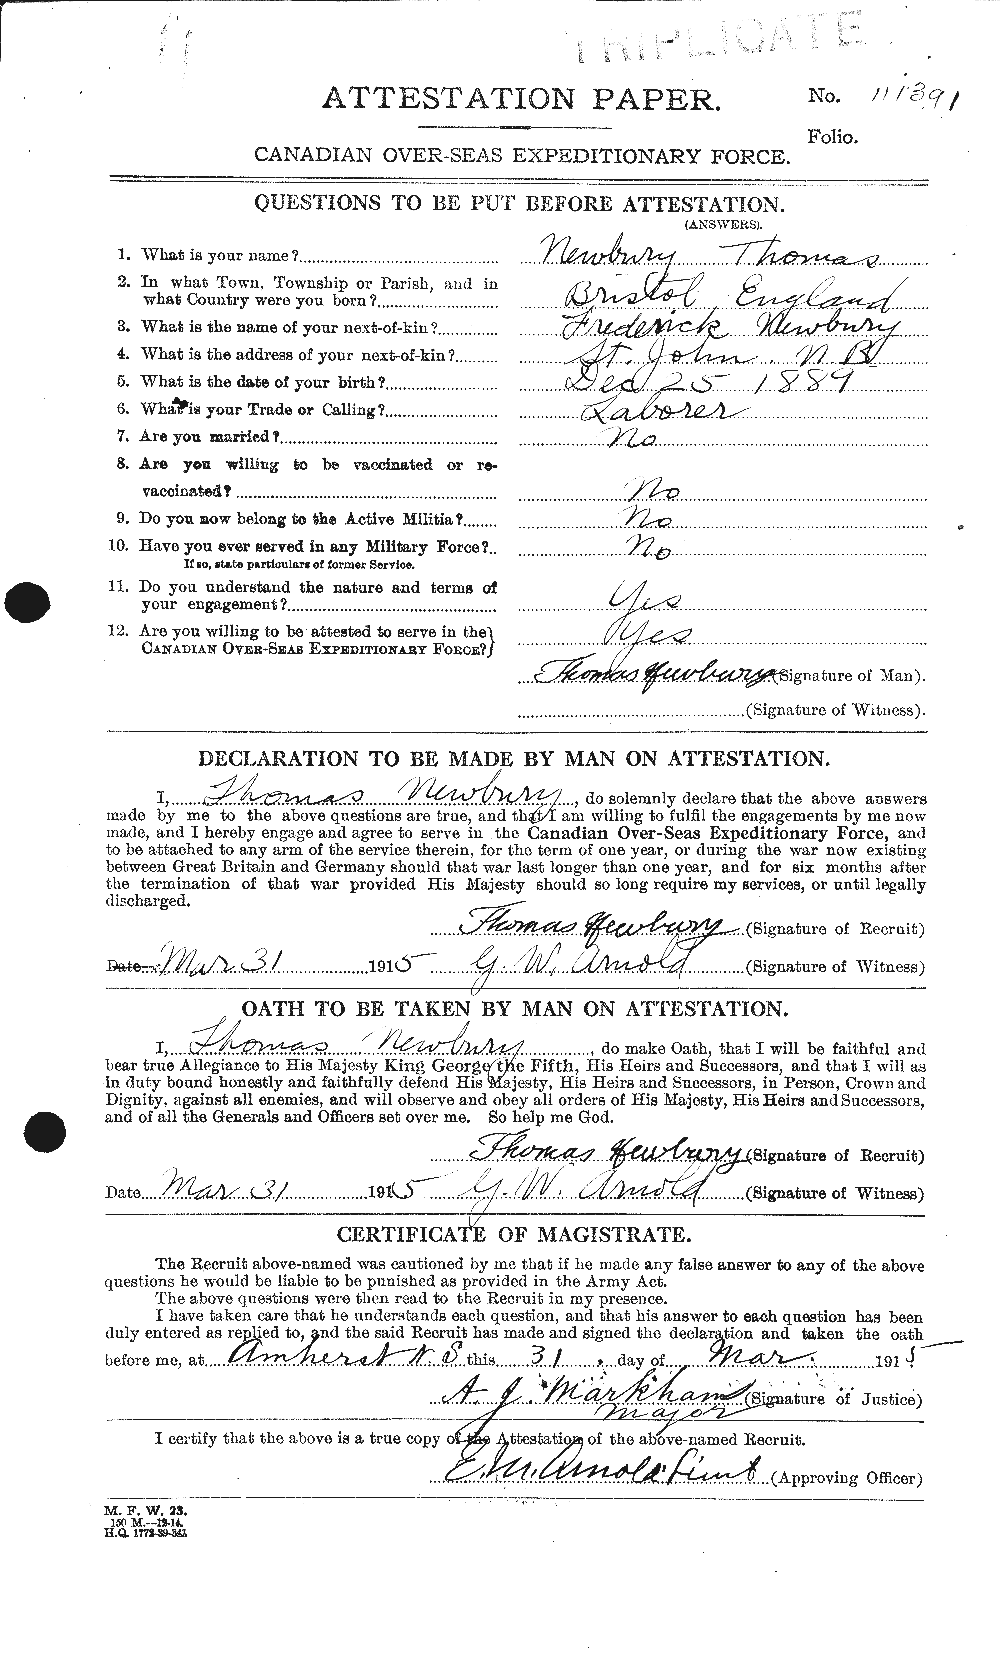 Personnel Records of the First World War - CEF 544116a